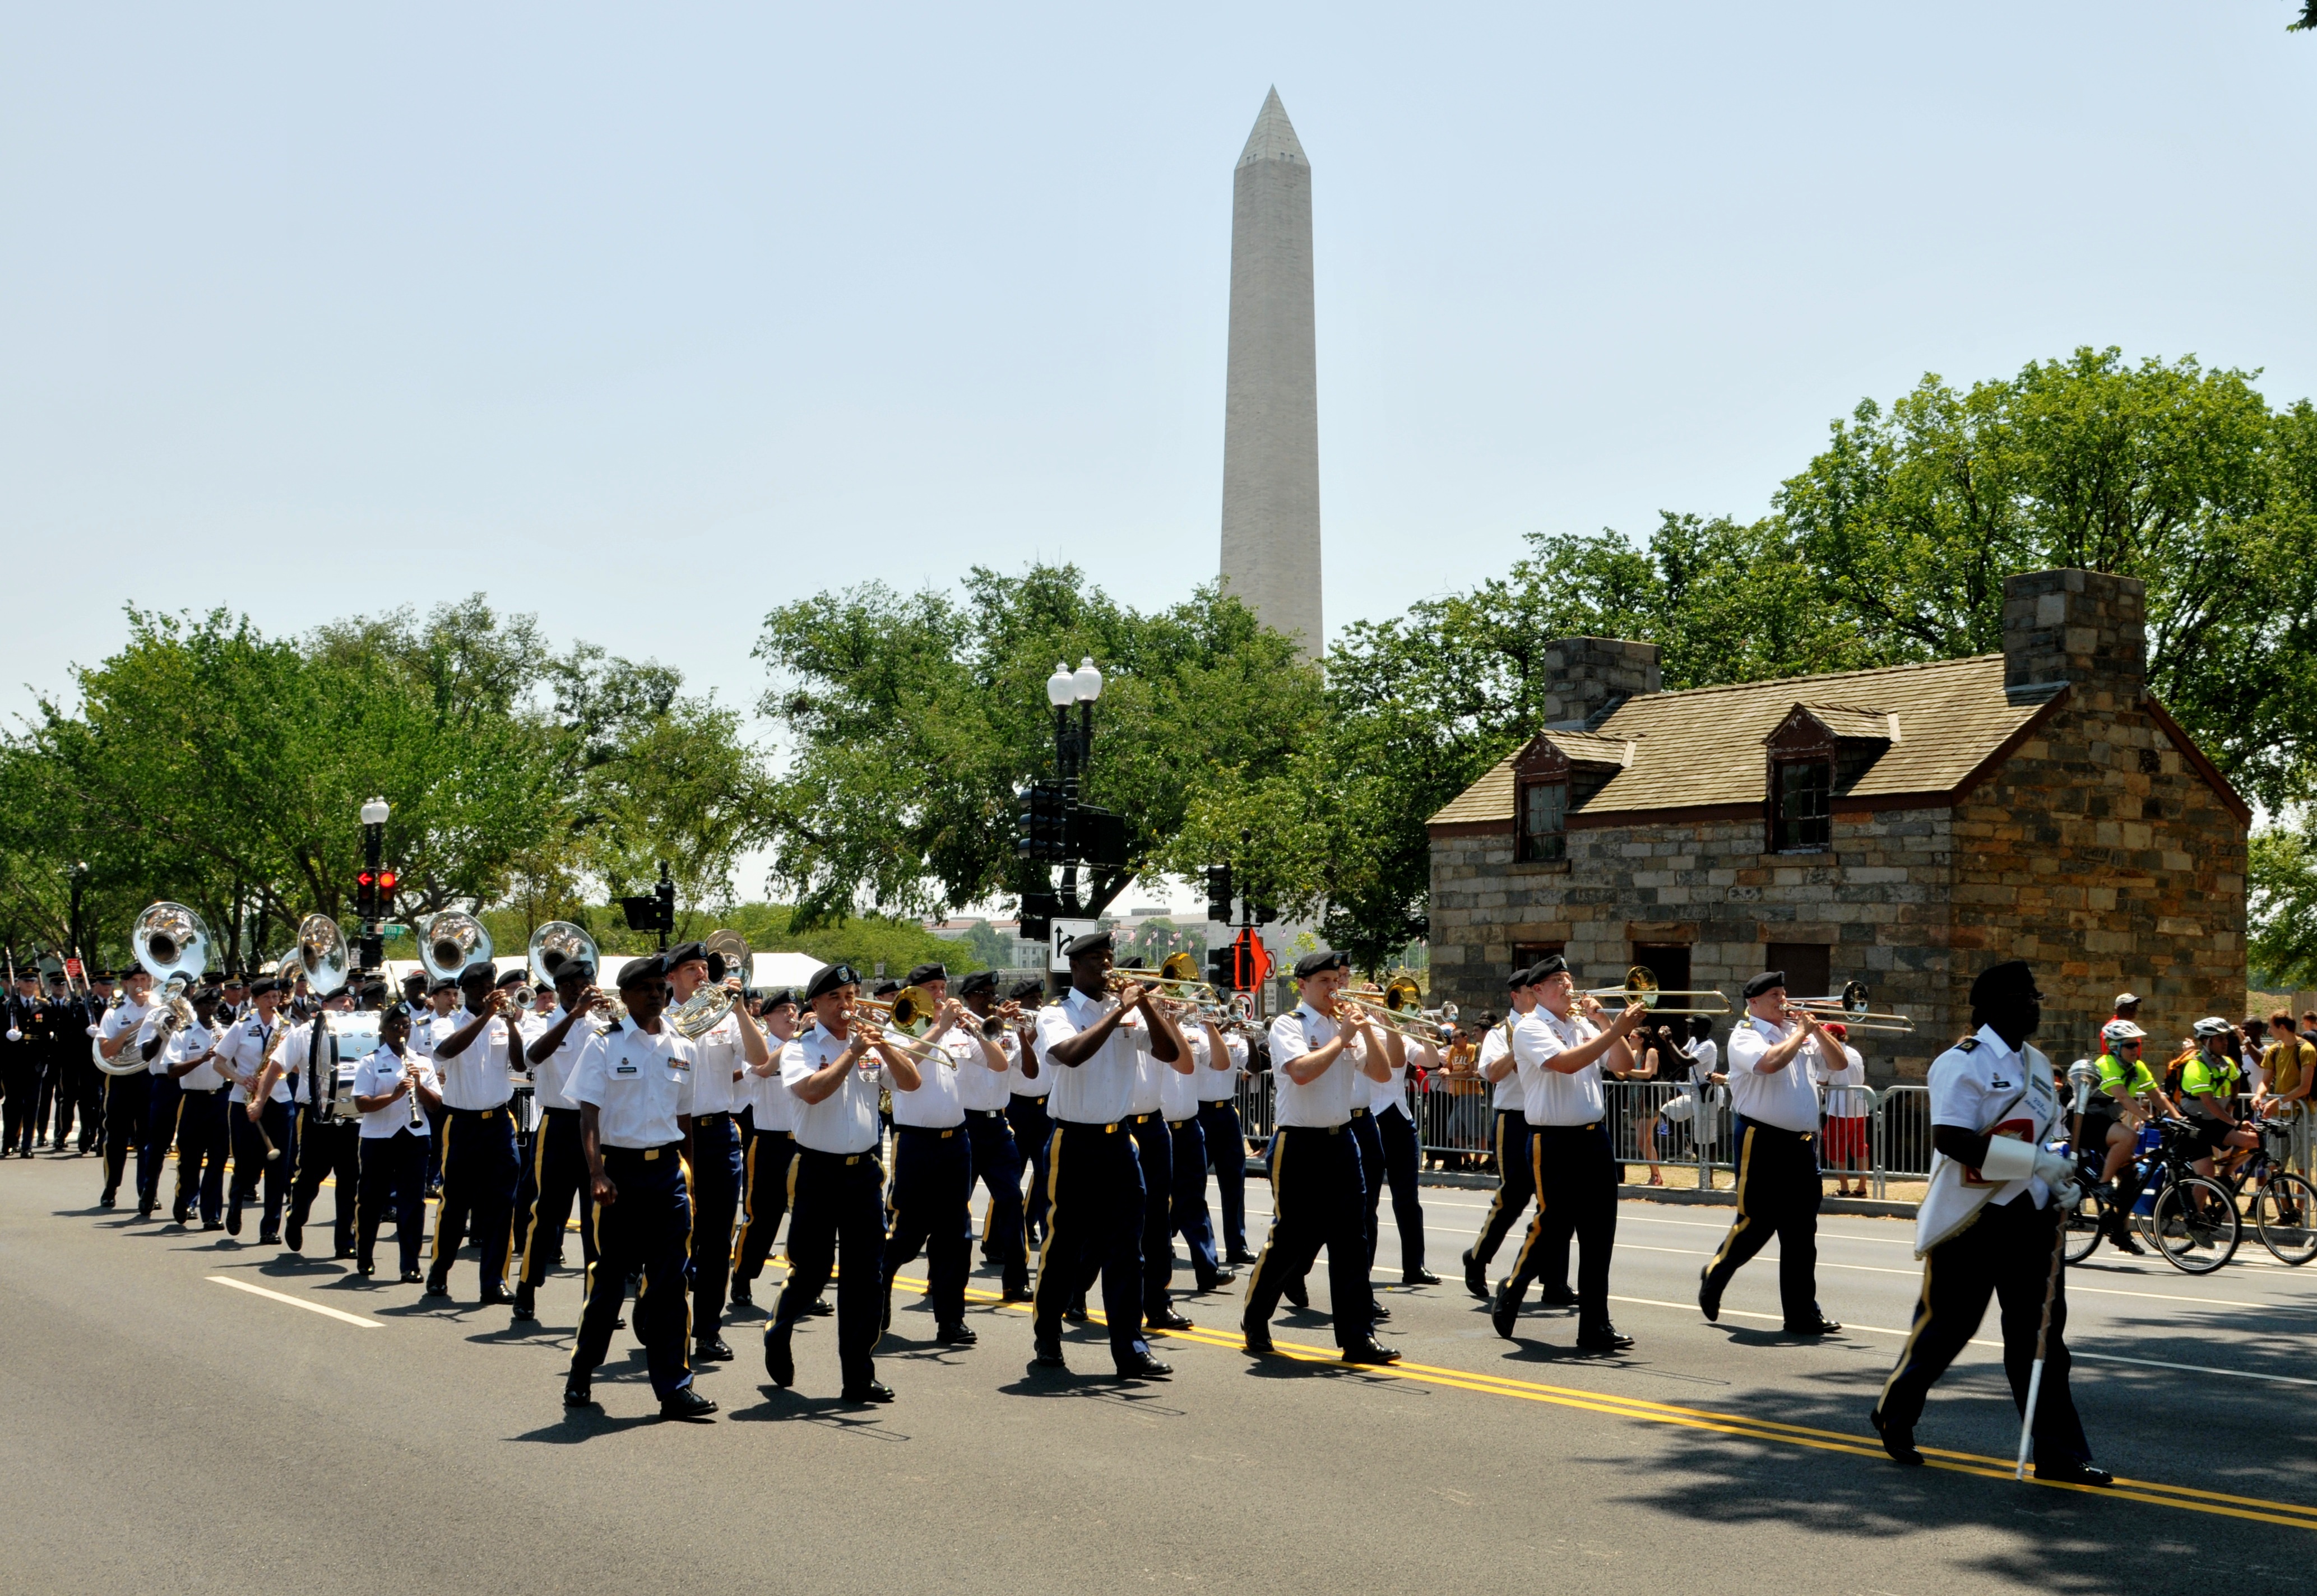 Sgt. 1st Class Monet Davis leads V.I. and D.C. band members in the nation's Independence Day parade in Washington on Wednesday.